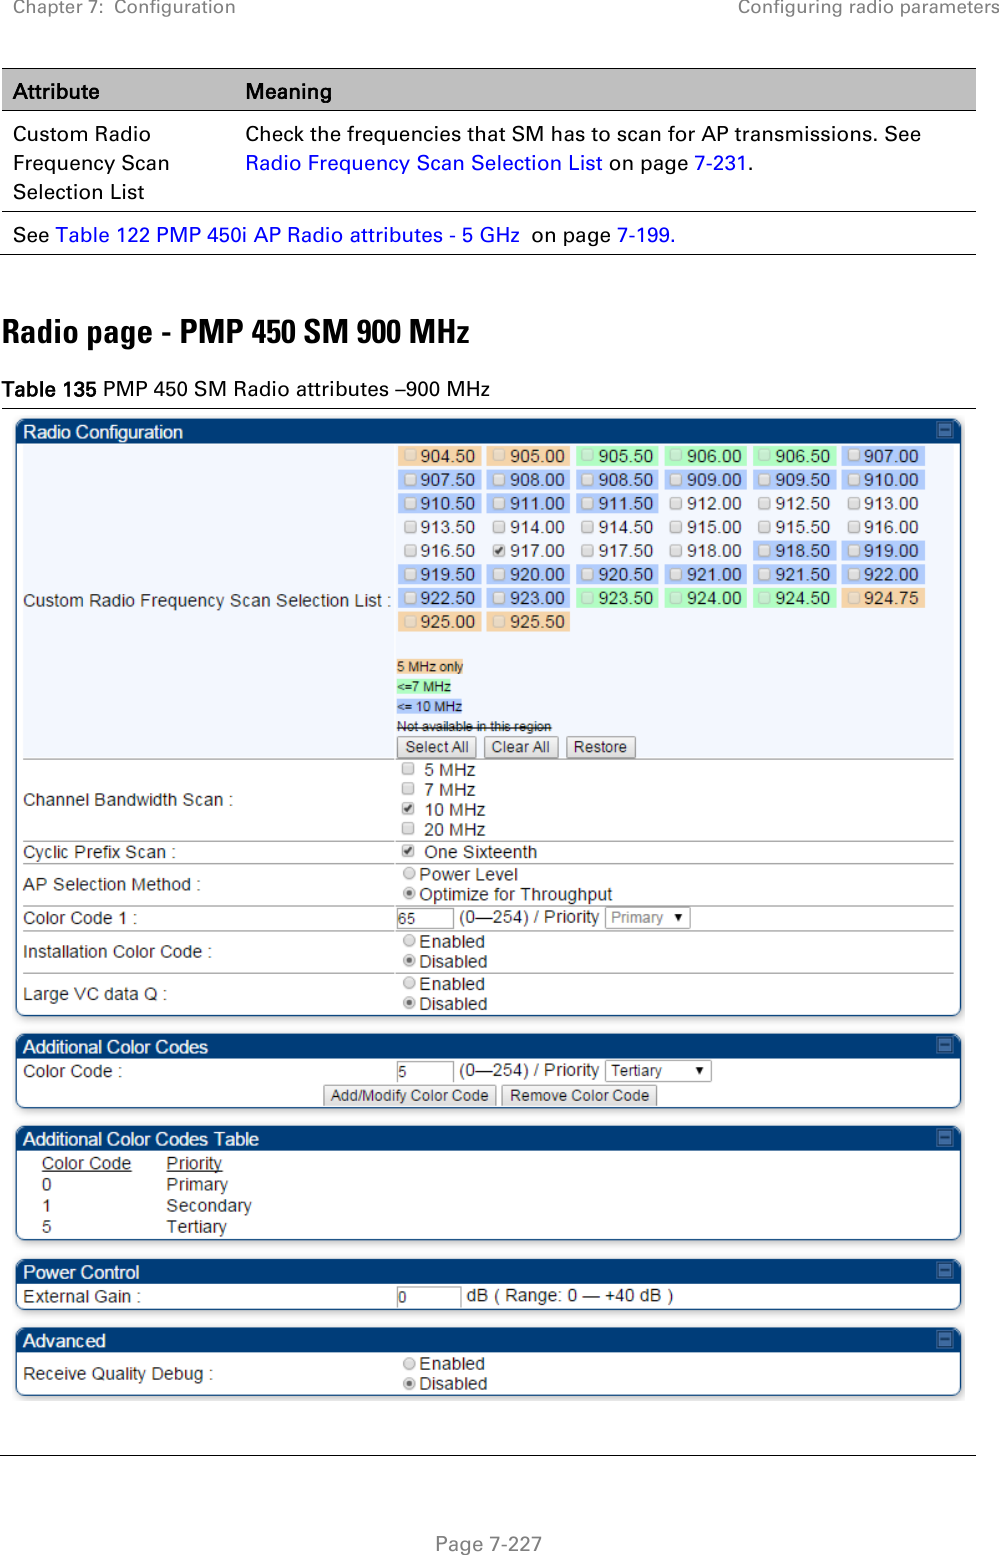 Chapter 7:  Configuration Configuring radio parameters   Page 7-227 Attribute Meaning Custom Radio Frequency Scan Selection List Check the frequencies that SM has to scan for AP transmissions. See Radio Frequency Scan Selection List on page 7-231. See Table 122 PMP 450i AP Radio attributes - 5 GHz  on page 7-199.  Radio page - PMP 450 SM 900 MHz Table 135 PMP 450 SM Radio attributes –900 MHz  